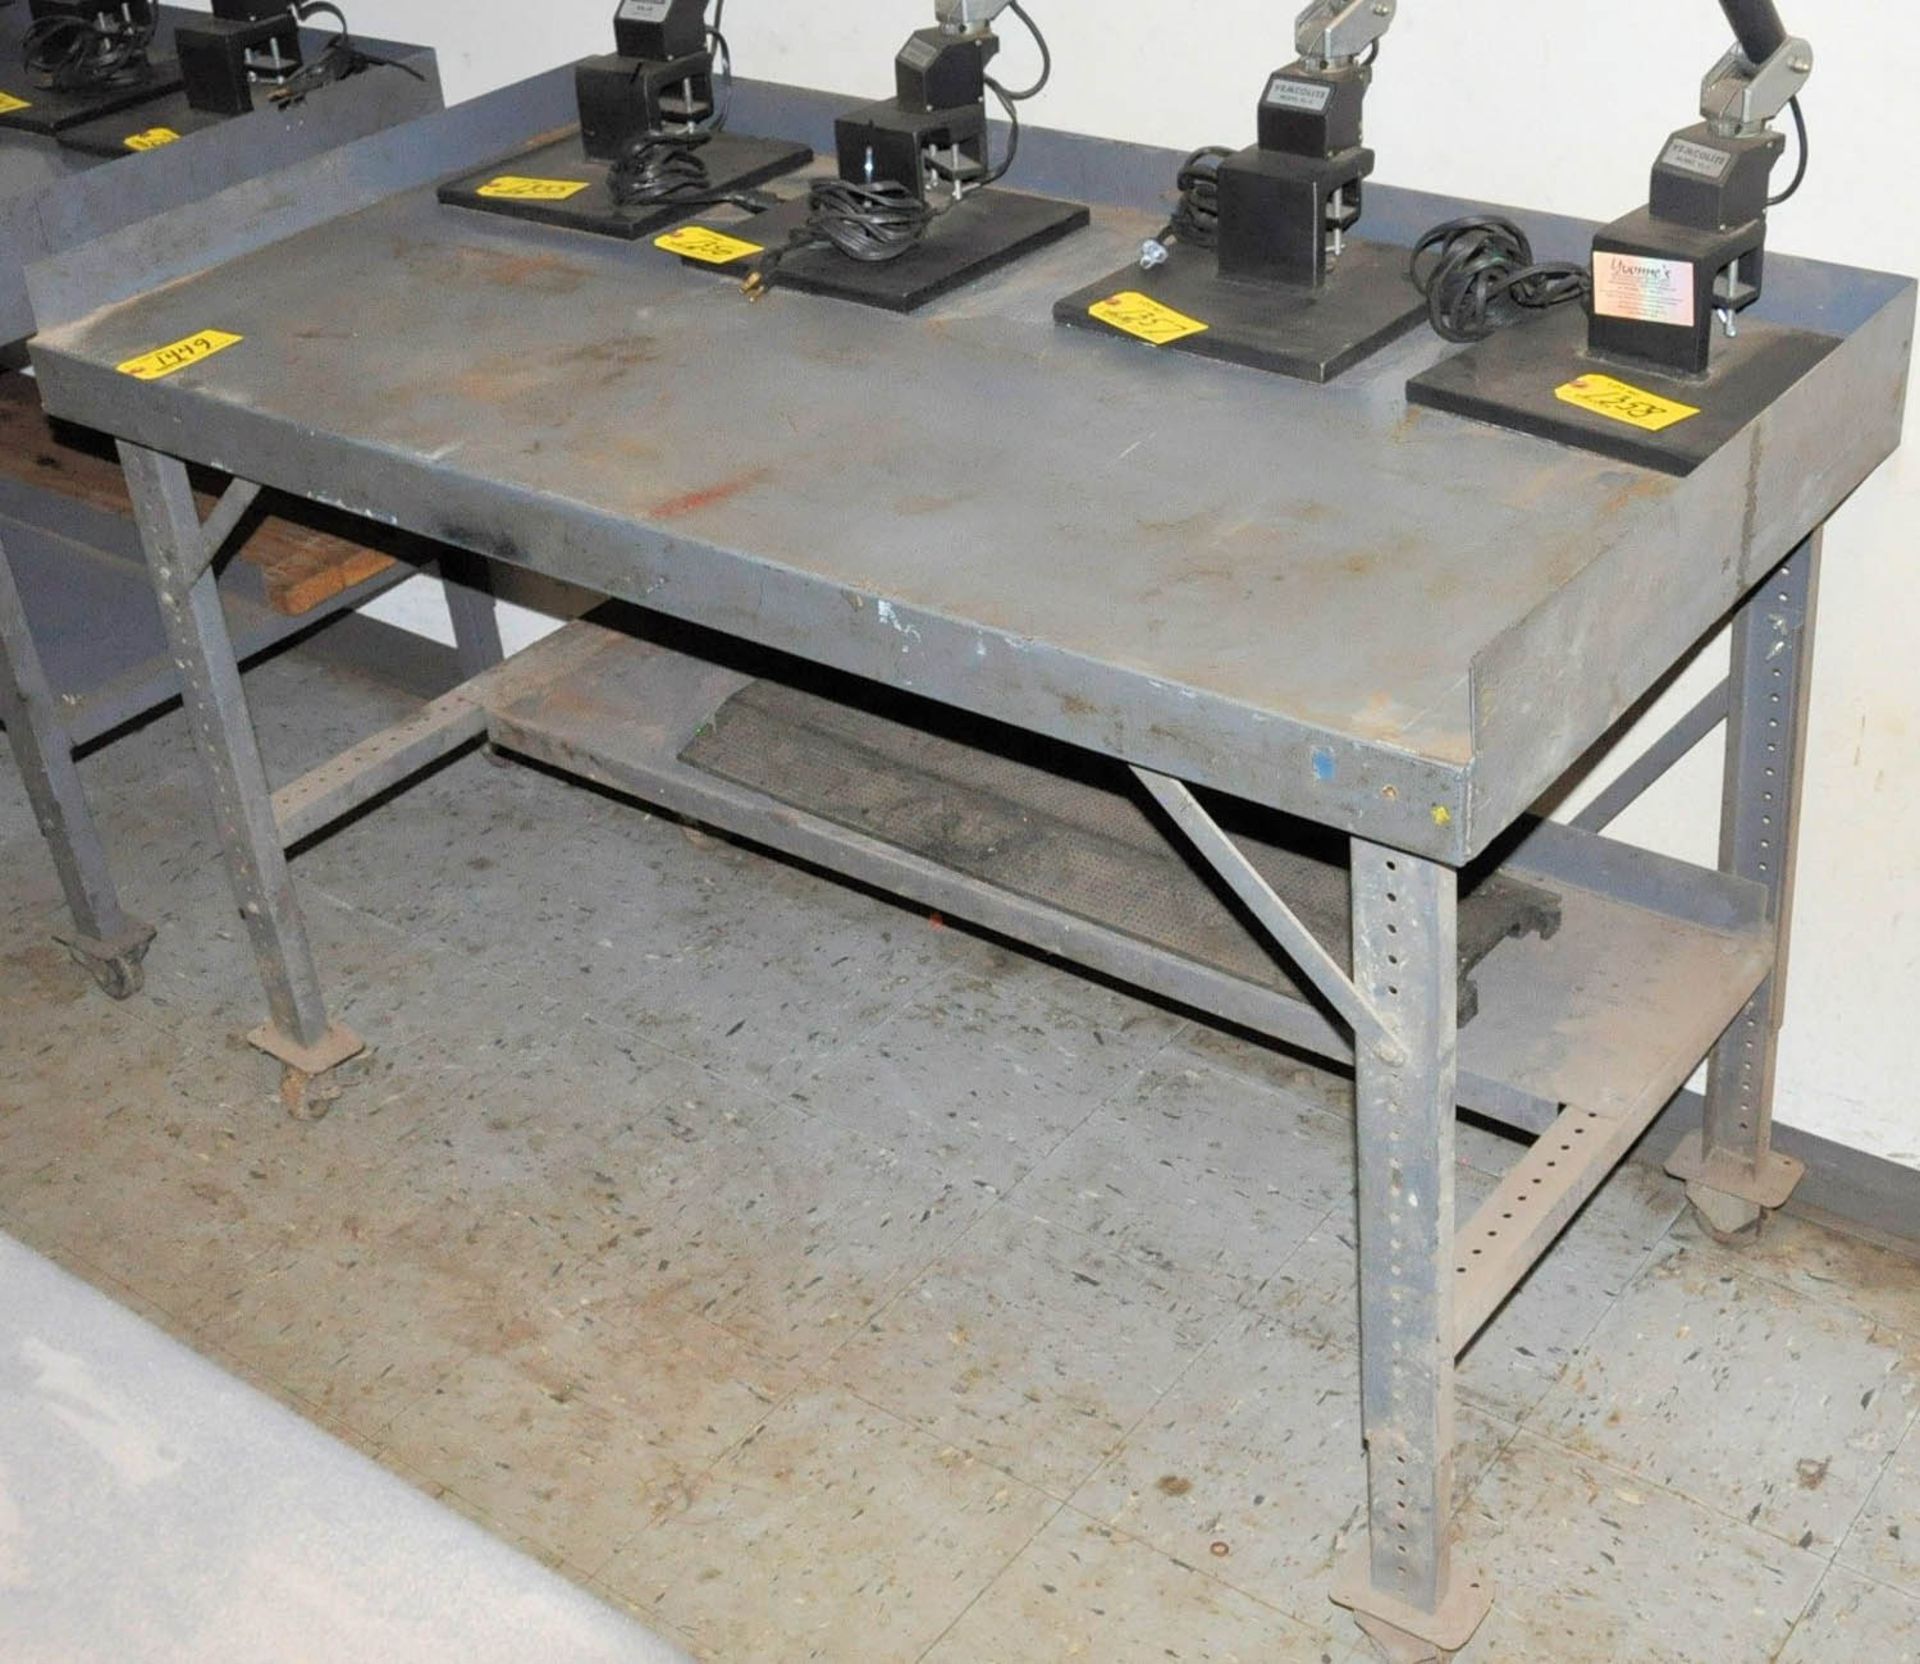 (2) 60" X 30" X 36" PORTABLE WORK BENCHES, (NOT TO BE REMOVED UNTIL EMPTY) - Bild 2 aus 2